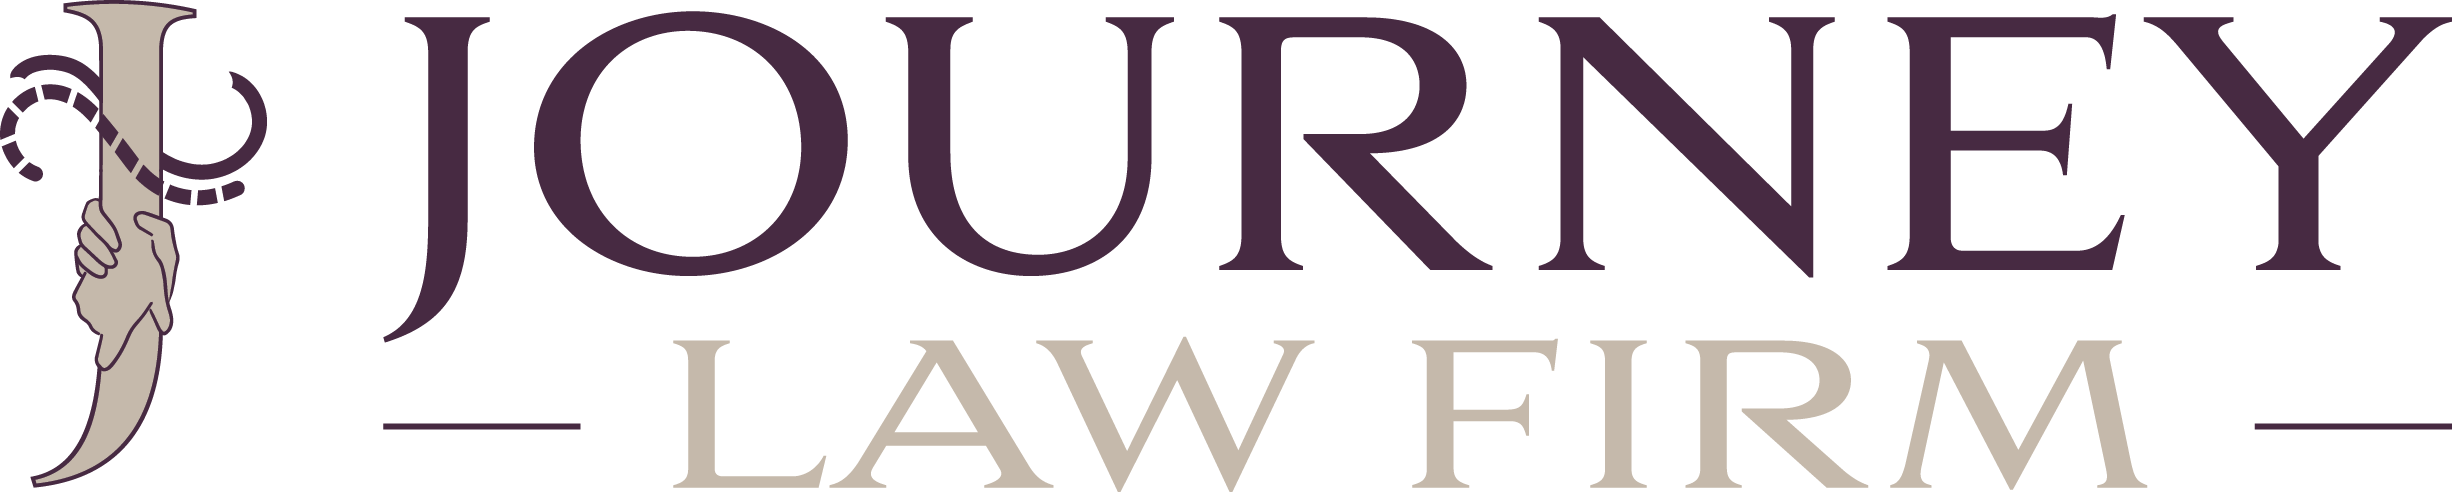 Journey Law Firm